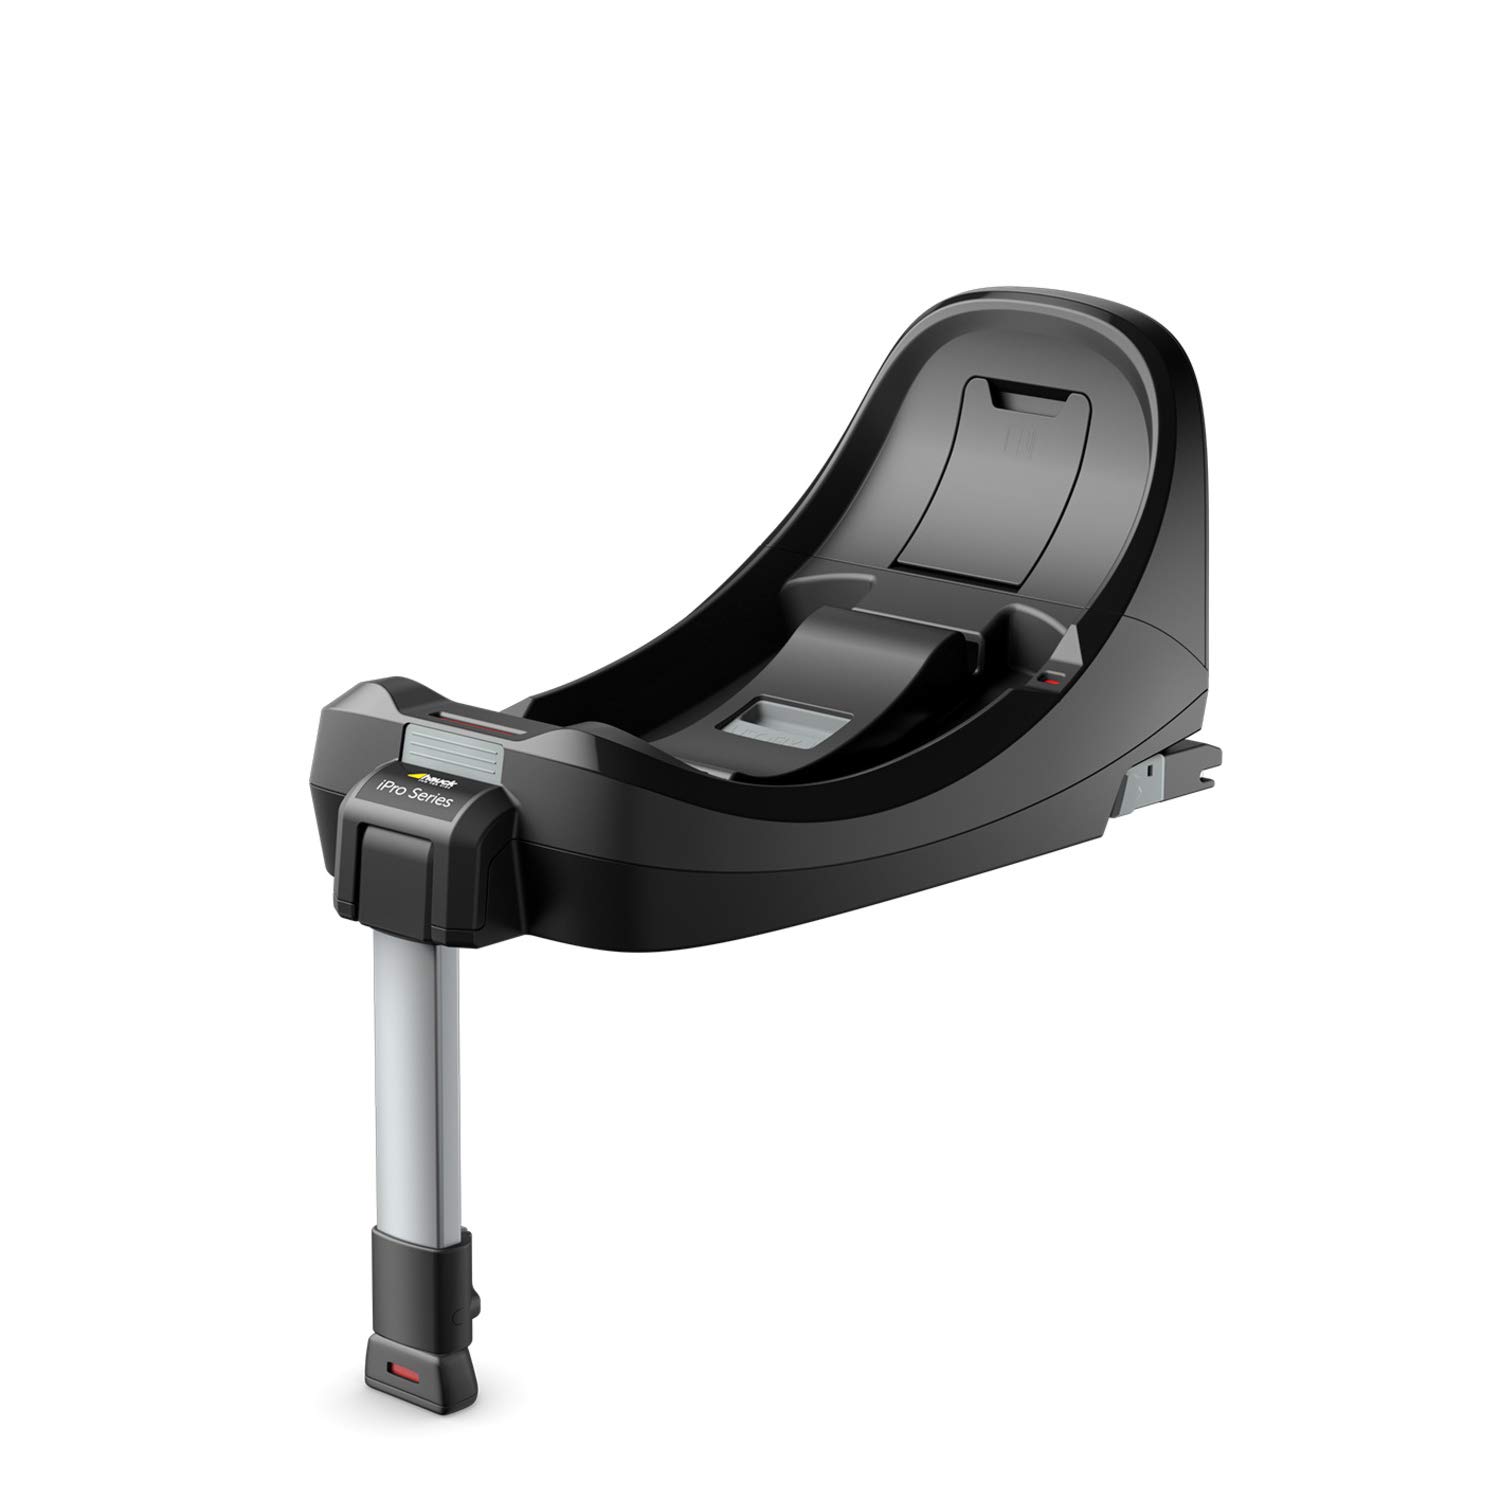 Hauck ISOFIX Station Suitable for i-Size Baby Car Seat iPro Baby / i-Size ECE R129 / Car Seat Group 0 / Usable from Birth to 85 cm (0 - 13 kg) / Black